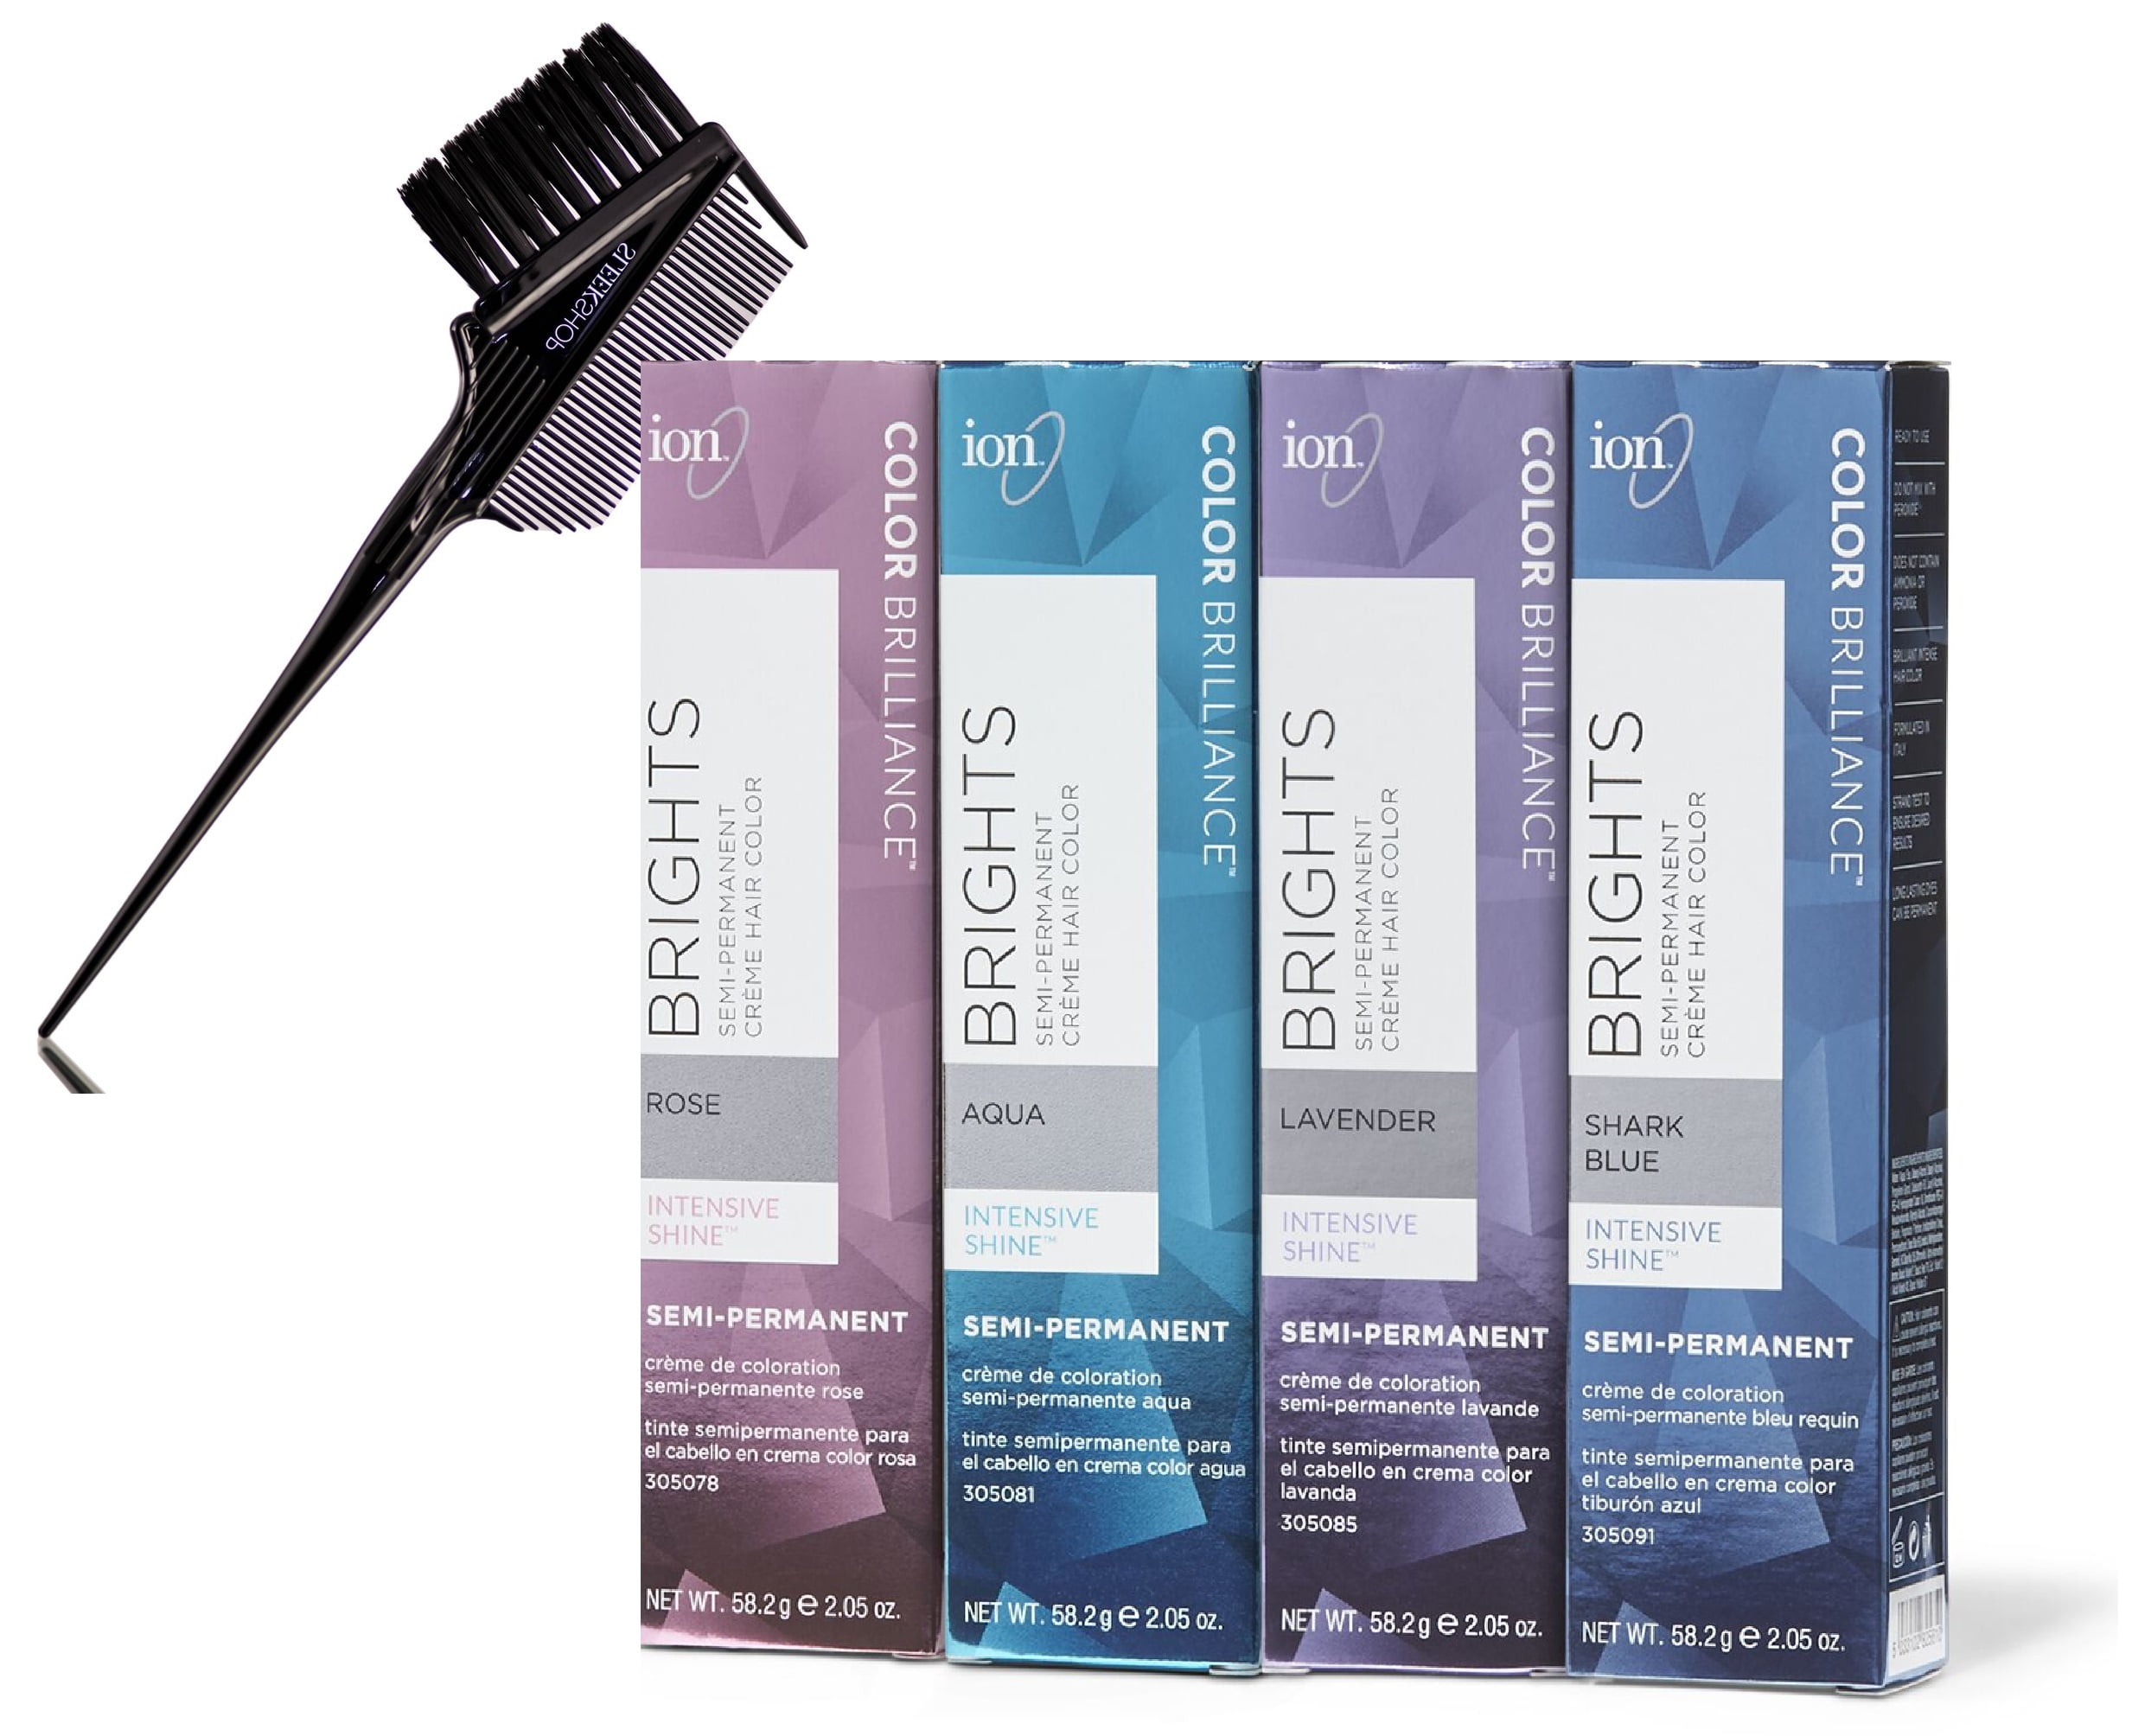 Aqua , ION Color Brilliance BRIGHTS Semi-Permanent Creme Hair Color Dye  (Size:  oz) Cream Haircolor - PACK OF 1 with SLEEKSHOP 3-in-1 Brush  Comb 